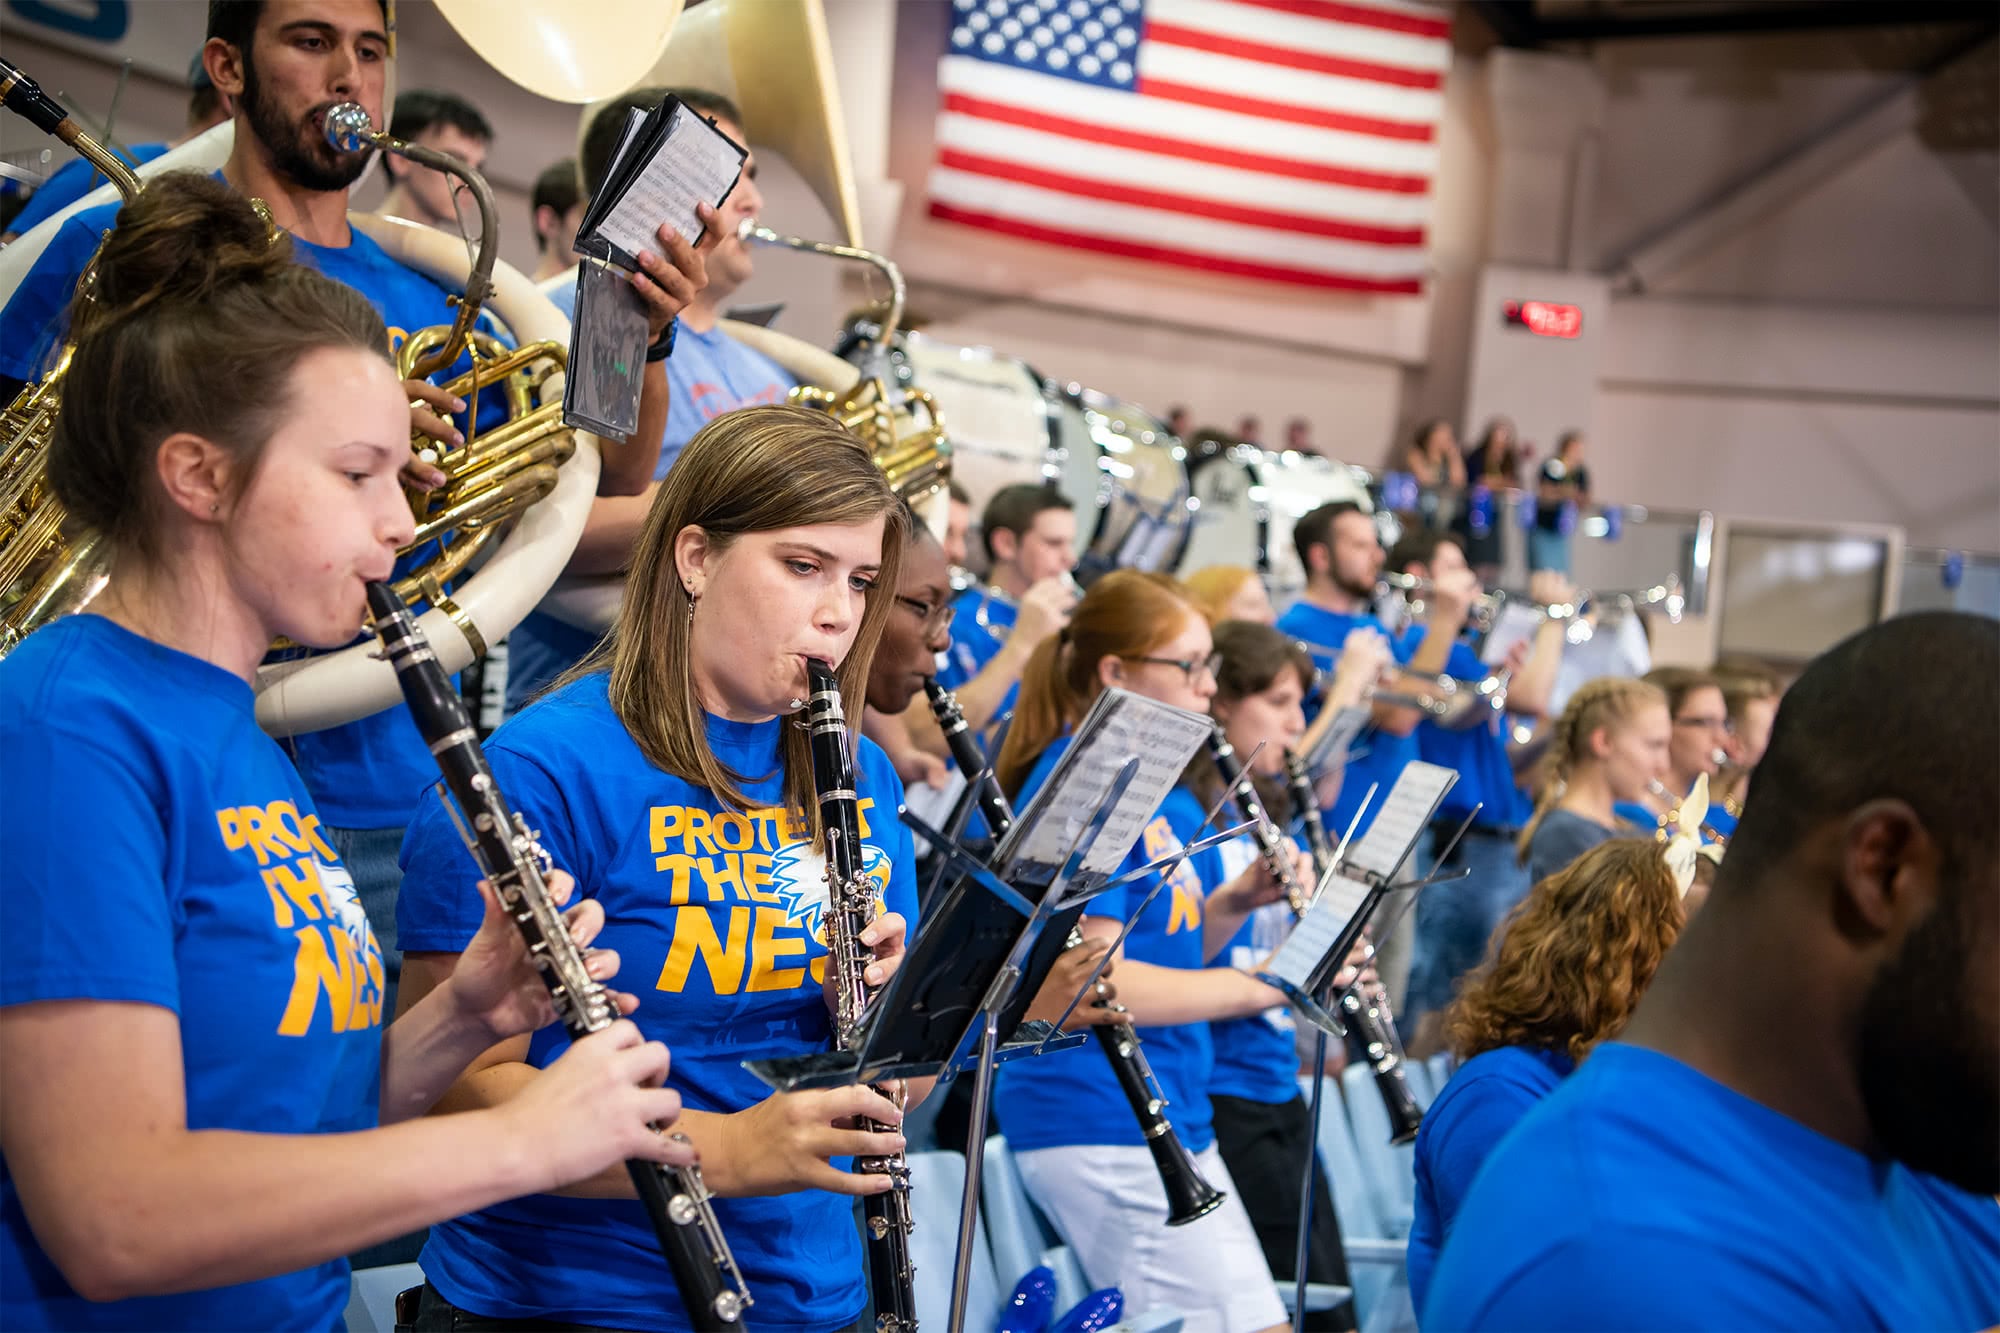 The Screaming Eagles (the pep band) play during Eagle Mania